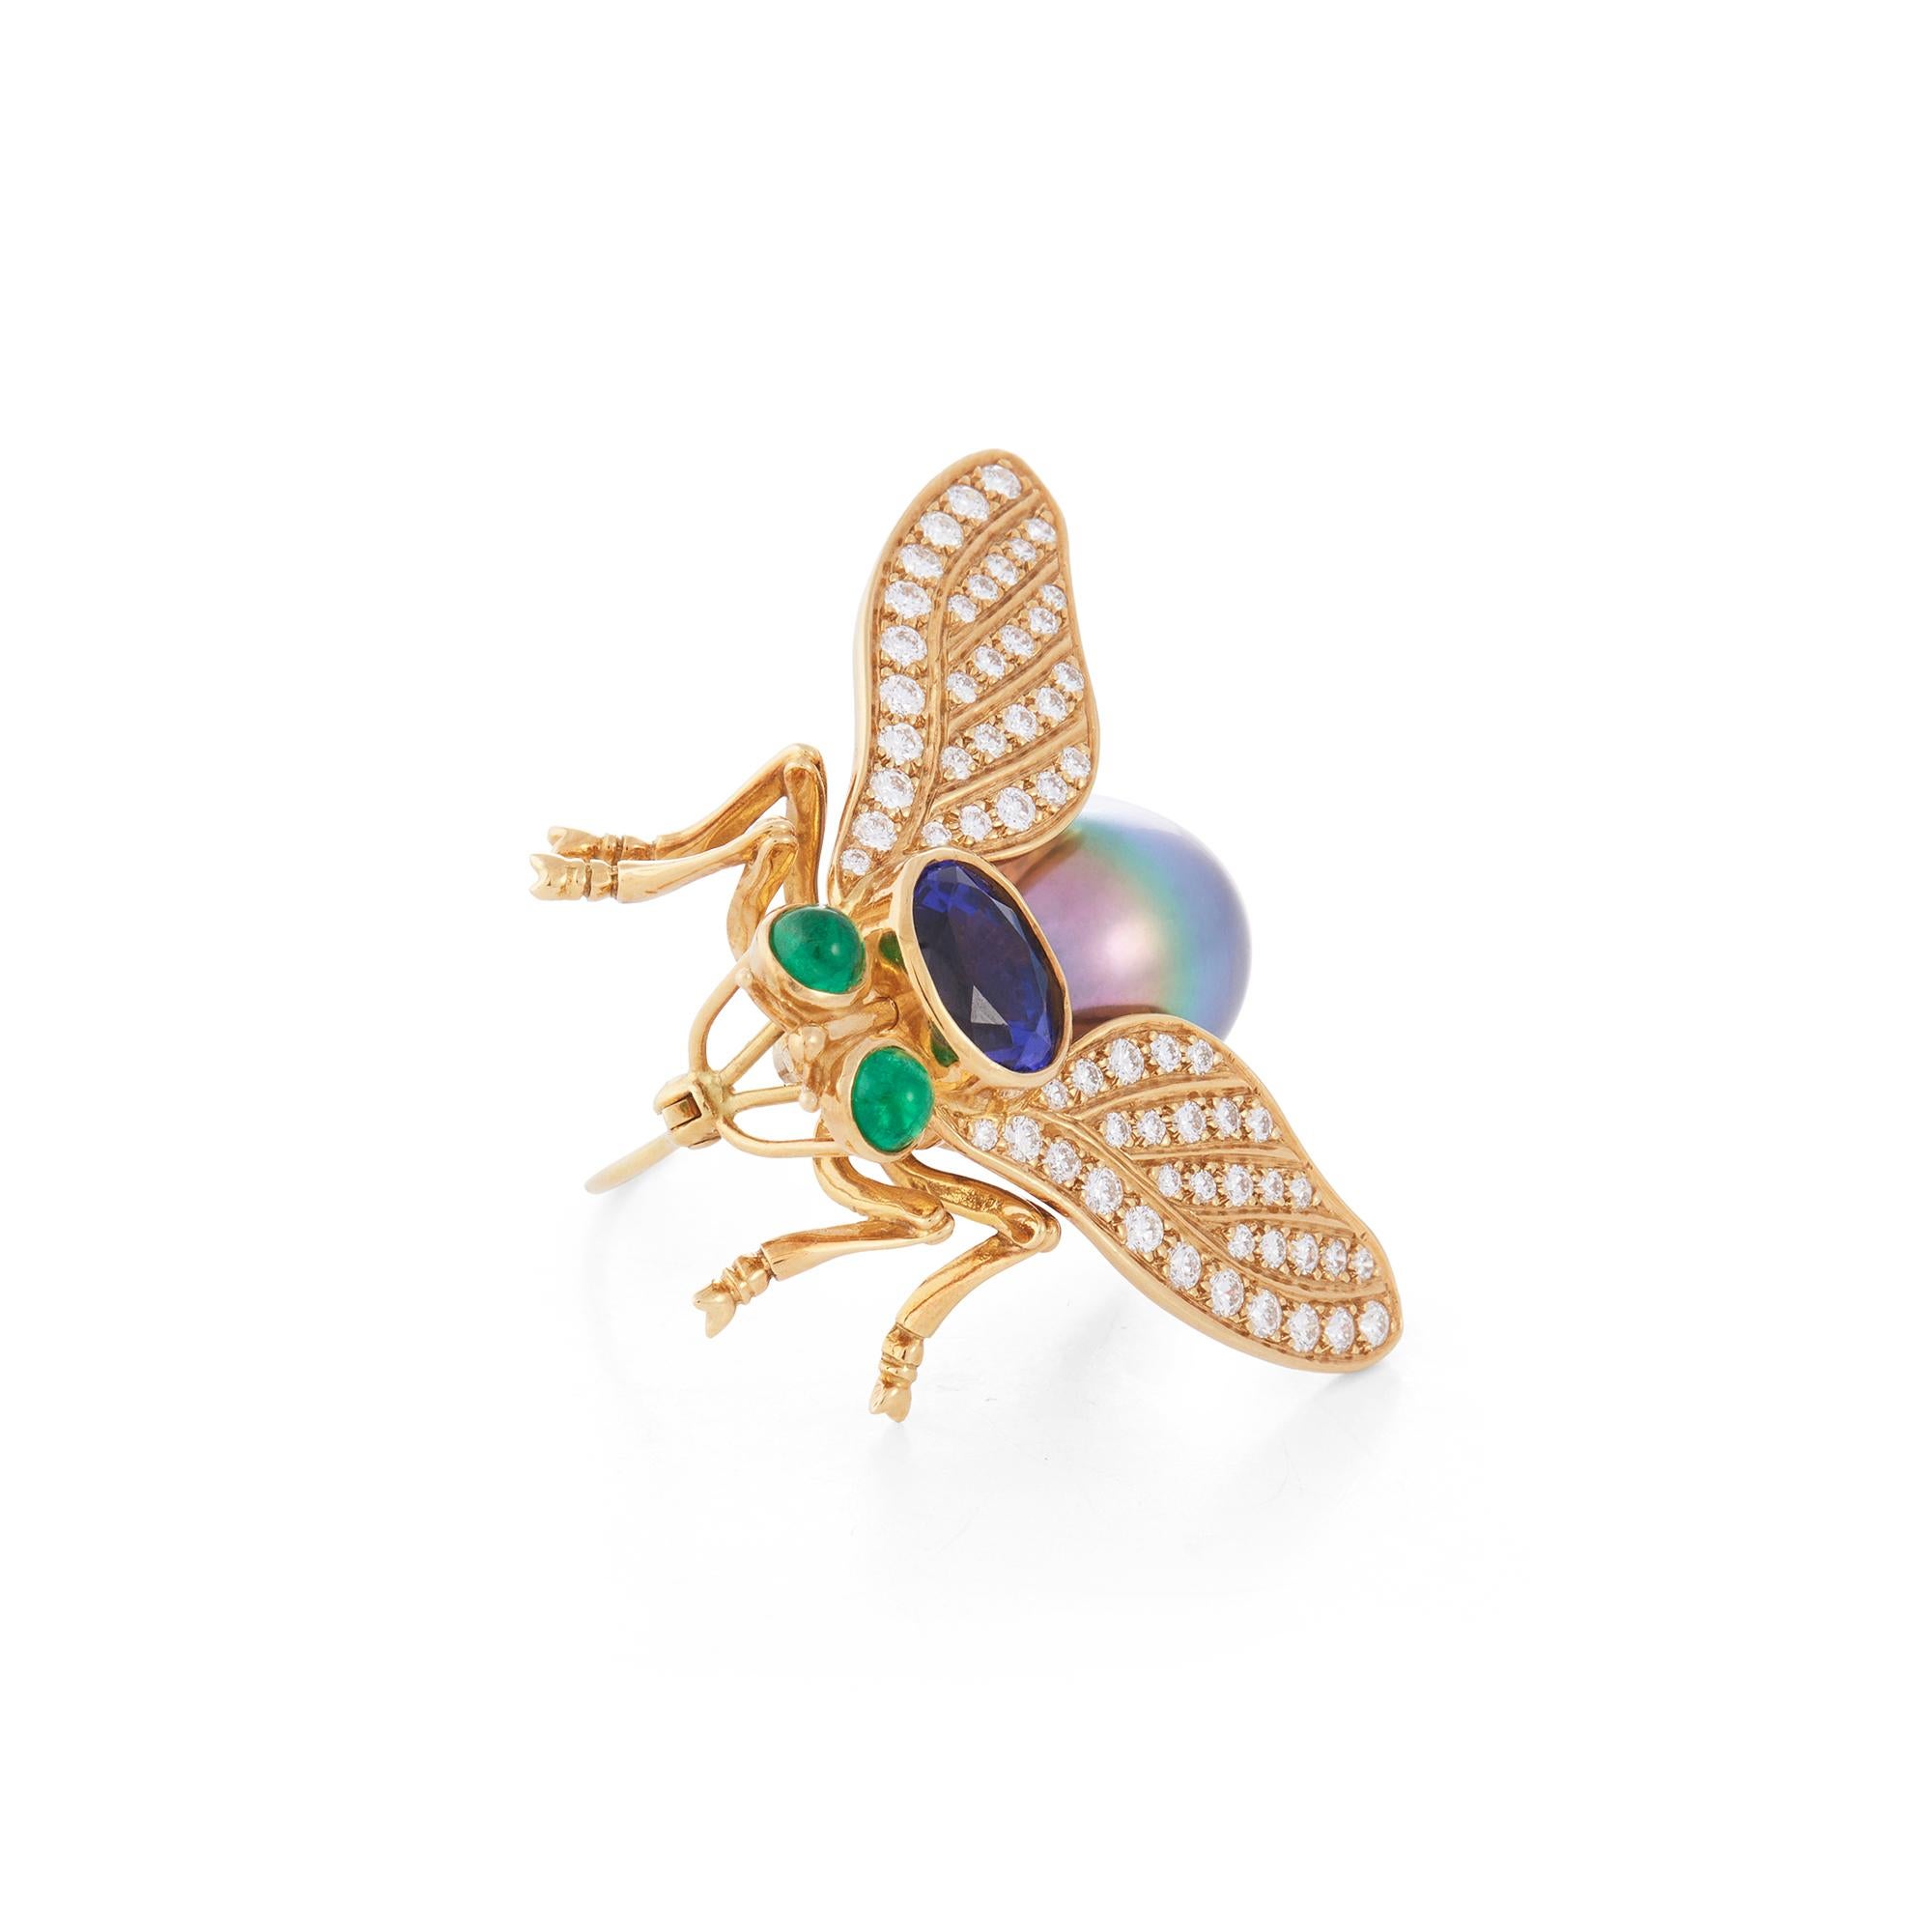 Authentic Tiffany & Co. brooch crafted in 18 karat yellow gold and designed as a fly, the body set with a Tahitian pearl and an oval cut tanzanite, the wings pave-set with 62 round brilliant cut diamonds weighing an estimated 0.75 carats, and the